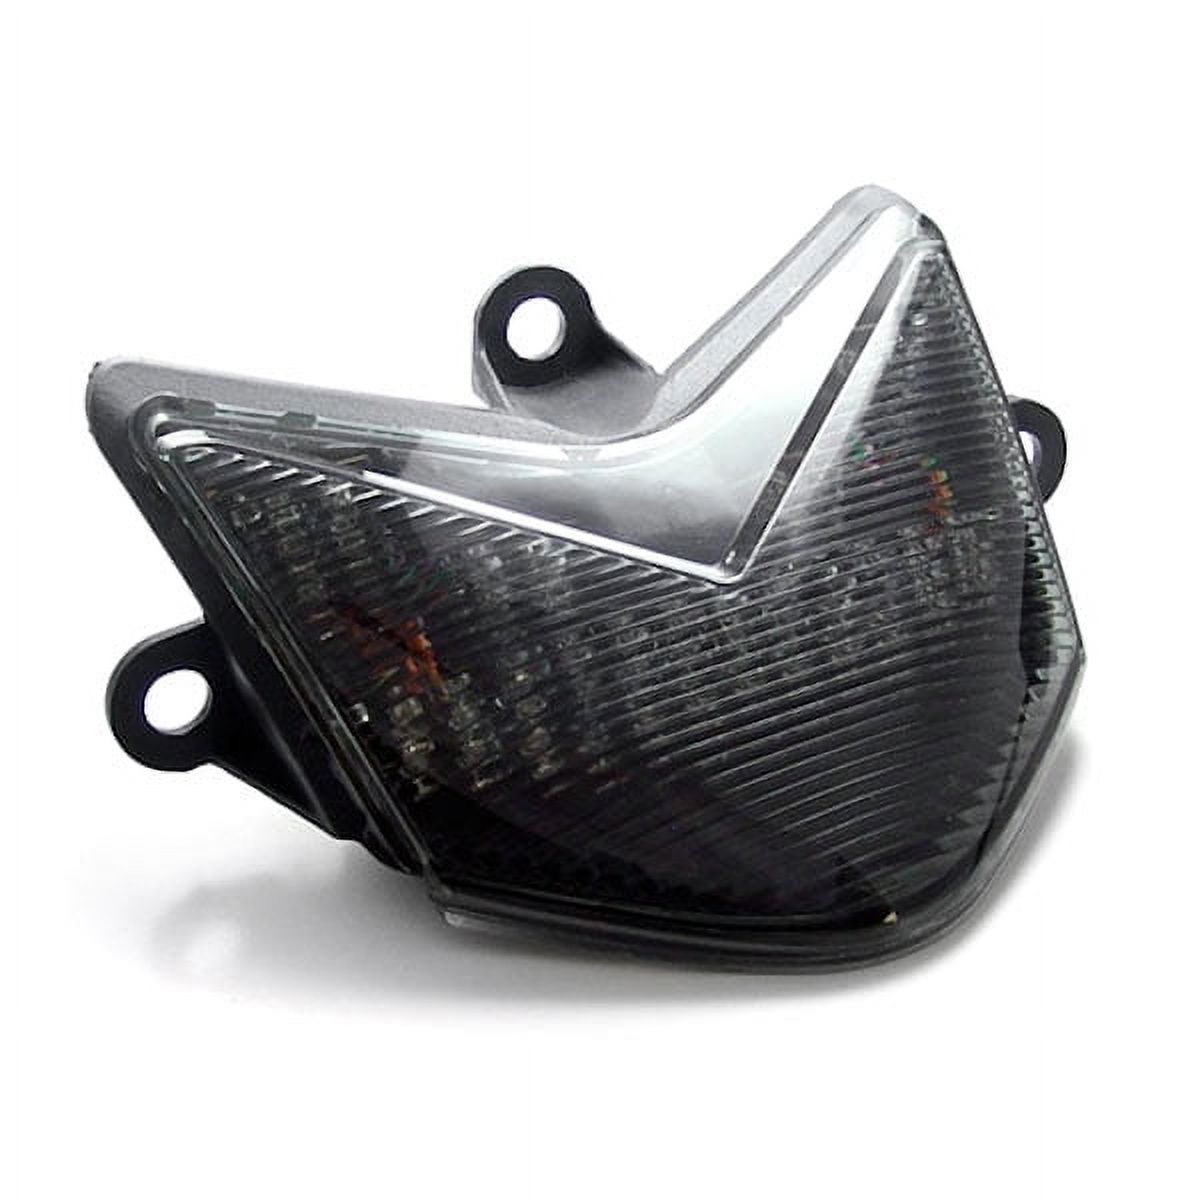 Krator Smoke LED Tail Light Integrated with Turn Signals Compatible with 2005 Kawasaki ZX1000 Ninja ZX-10R / ZX10 - image 1 of 1